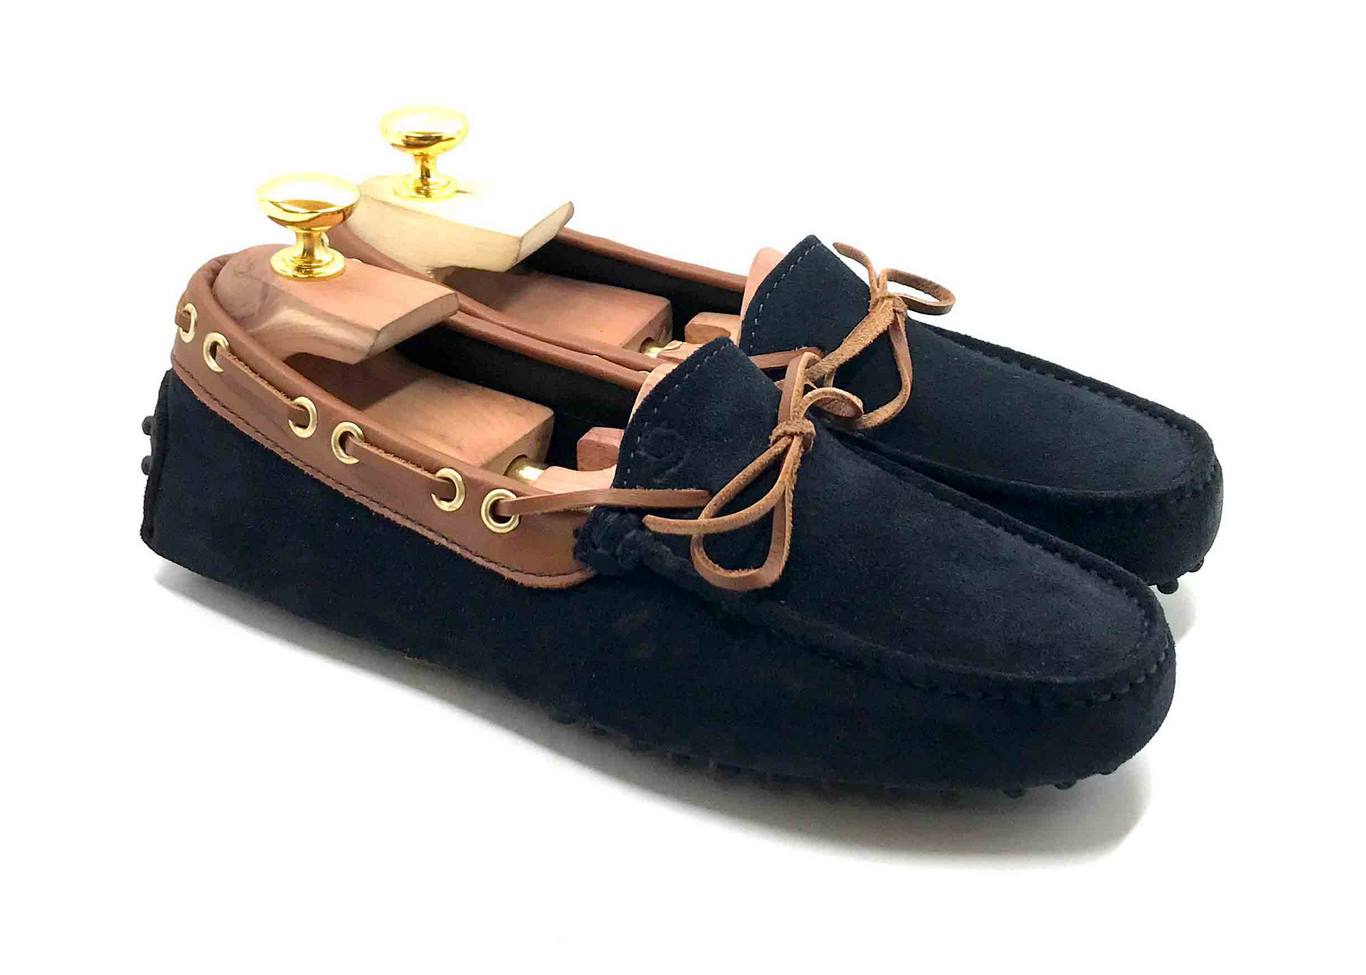 Loafers 'Drive' in dark Blue navy suede with light Brown details